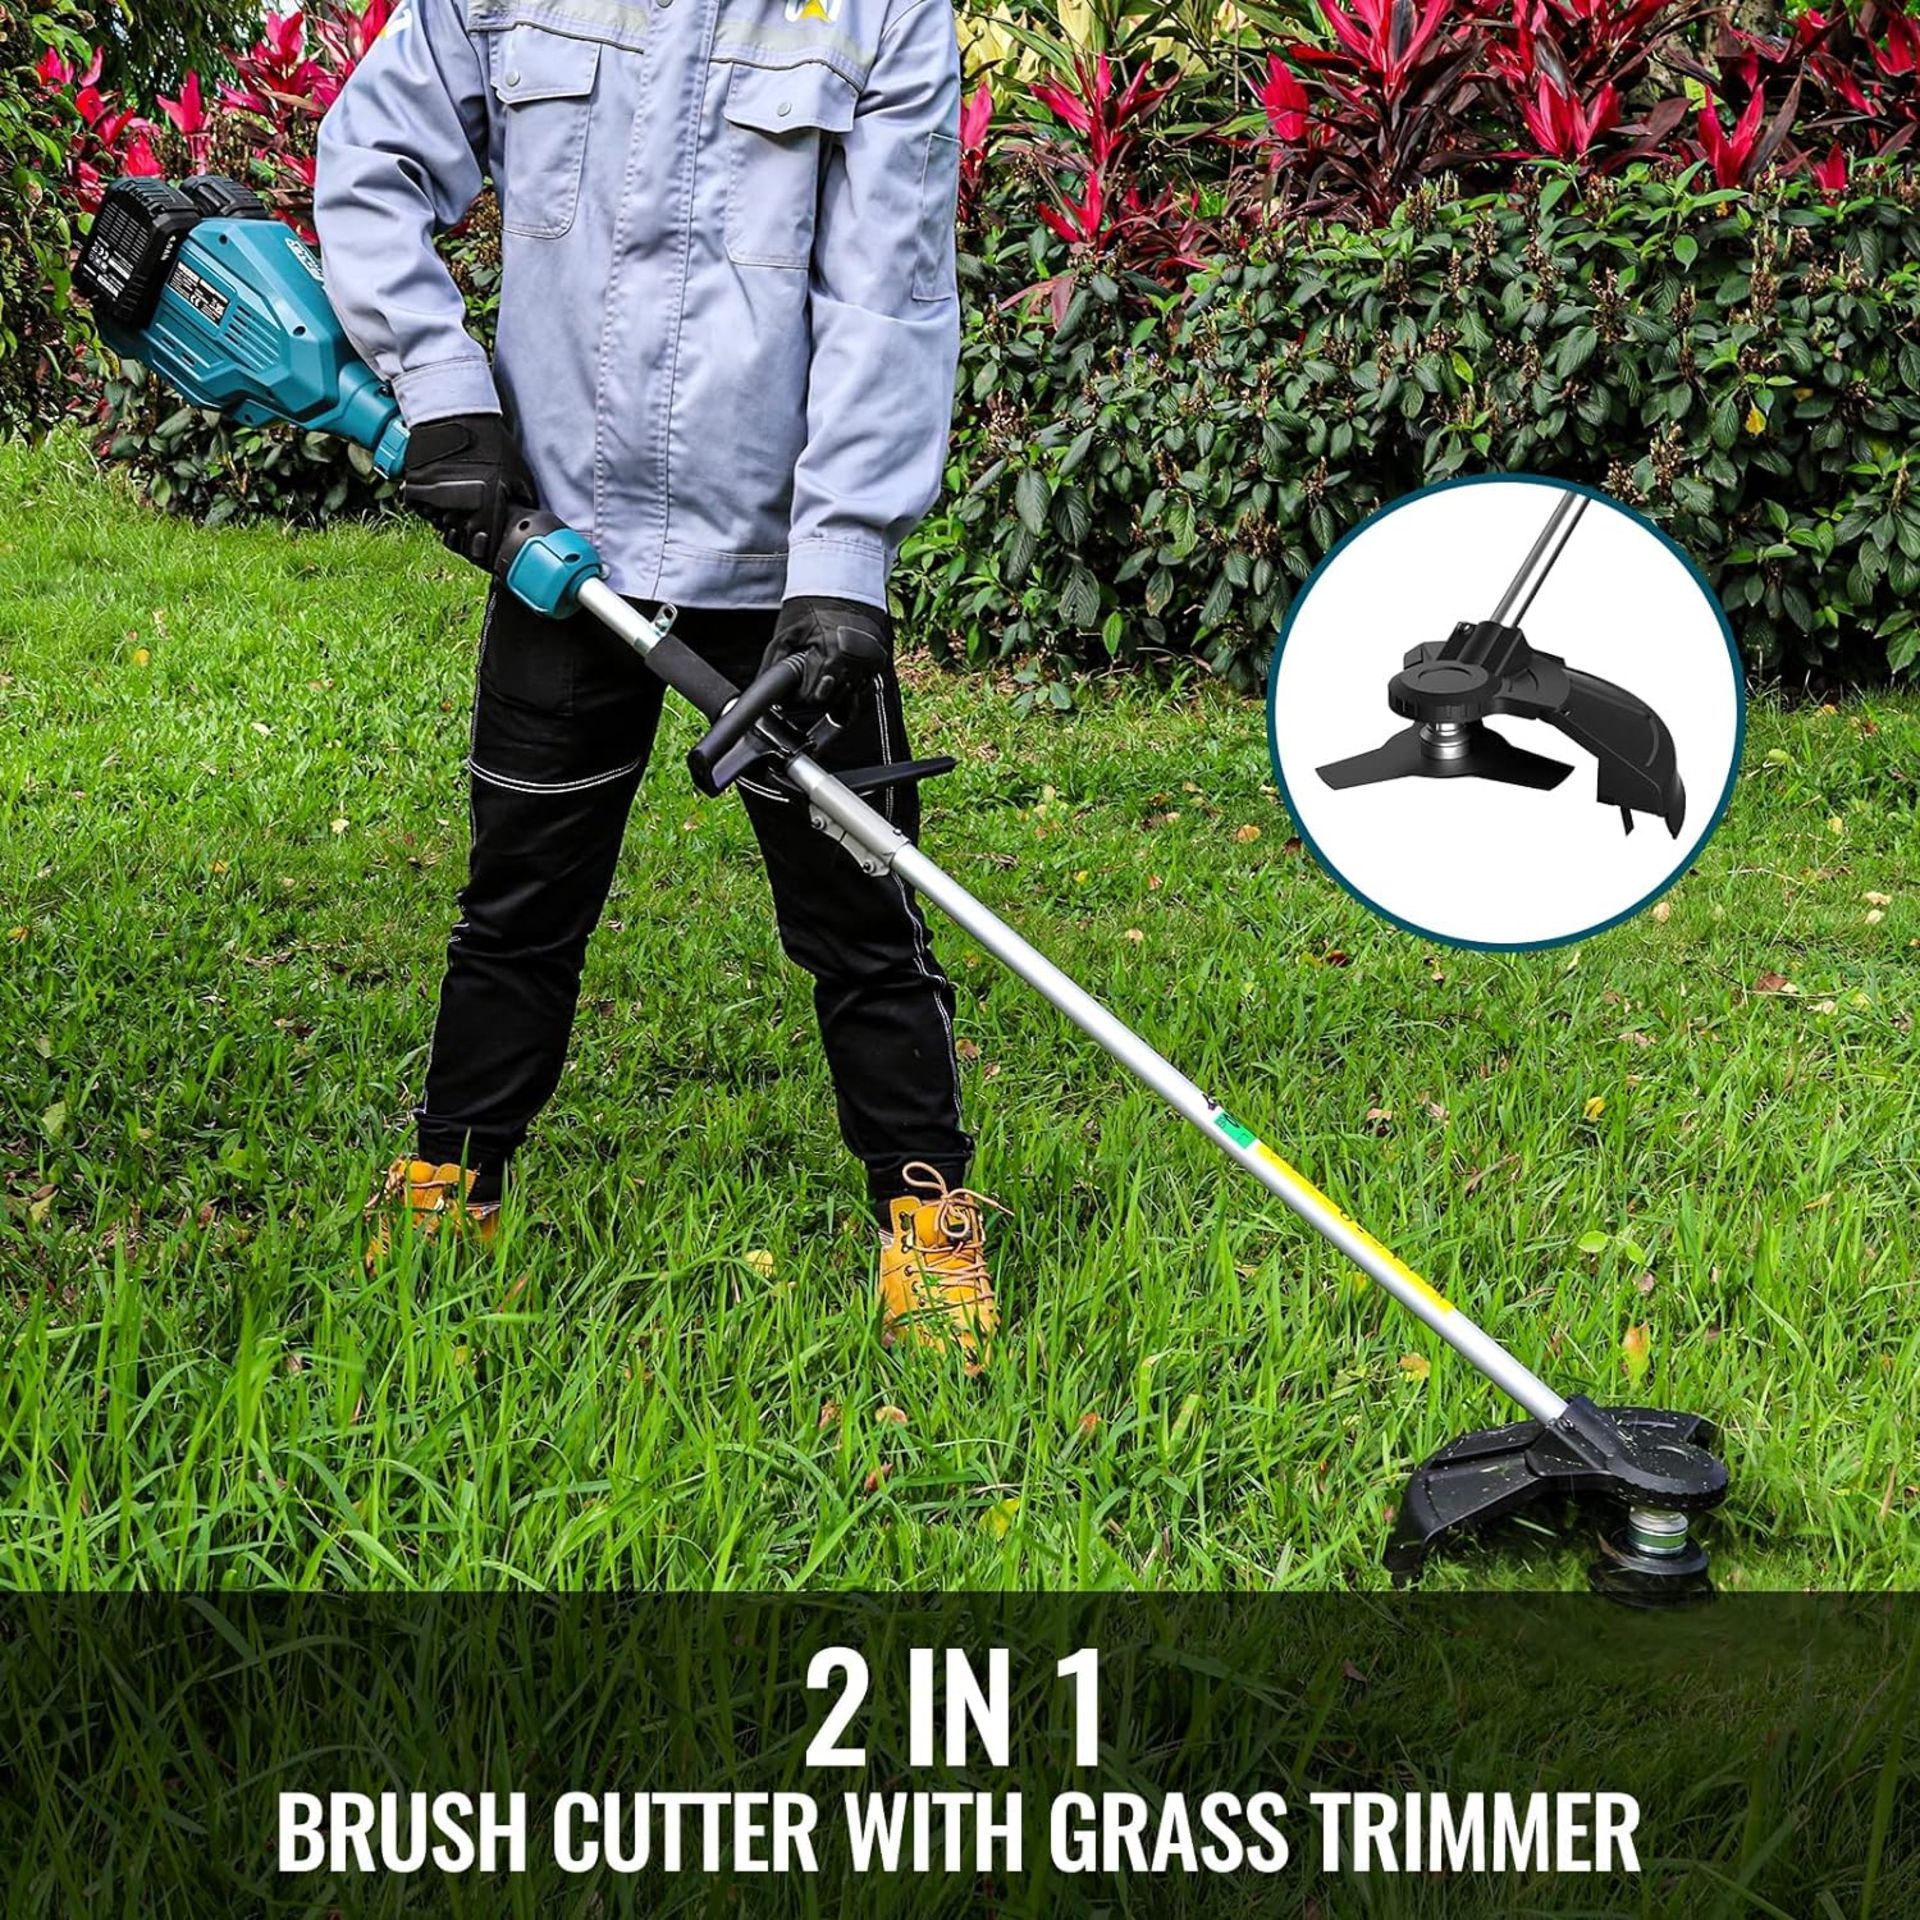 NEW & BOXED WESCO 36V Cordless 2-in-1 Brush Cutter & String Trimmer. RRP £169.99 EACH. It can not - Bild 5 aus 6